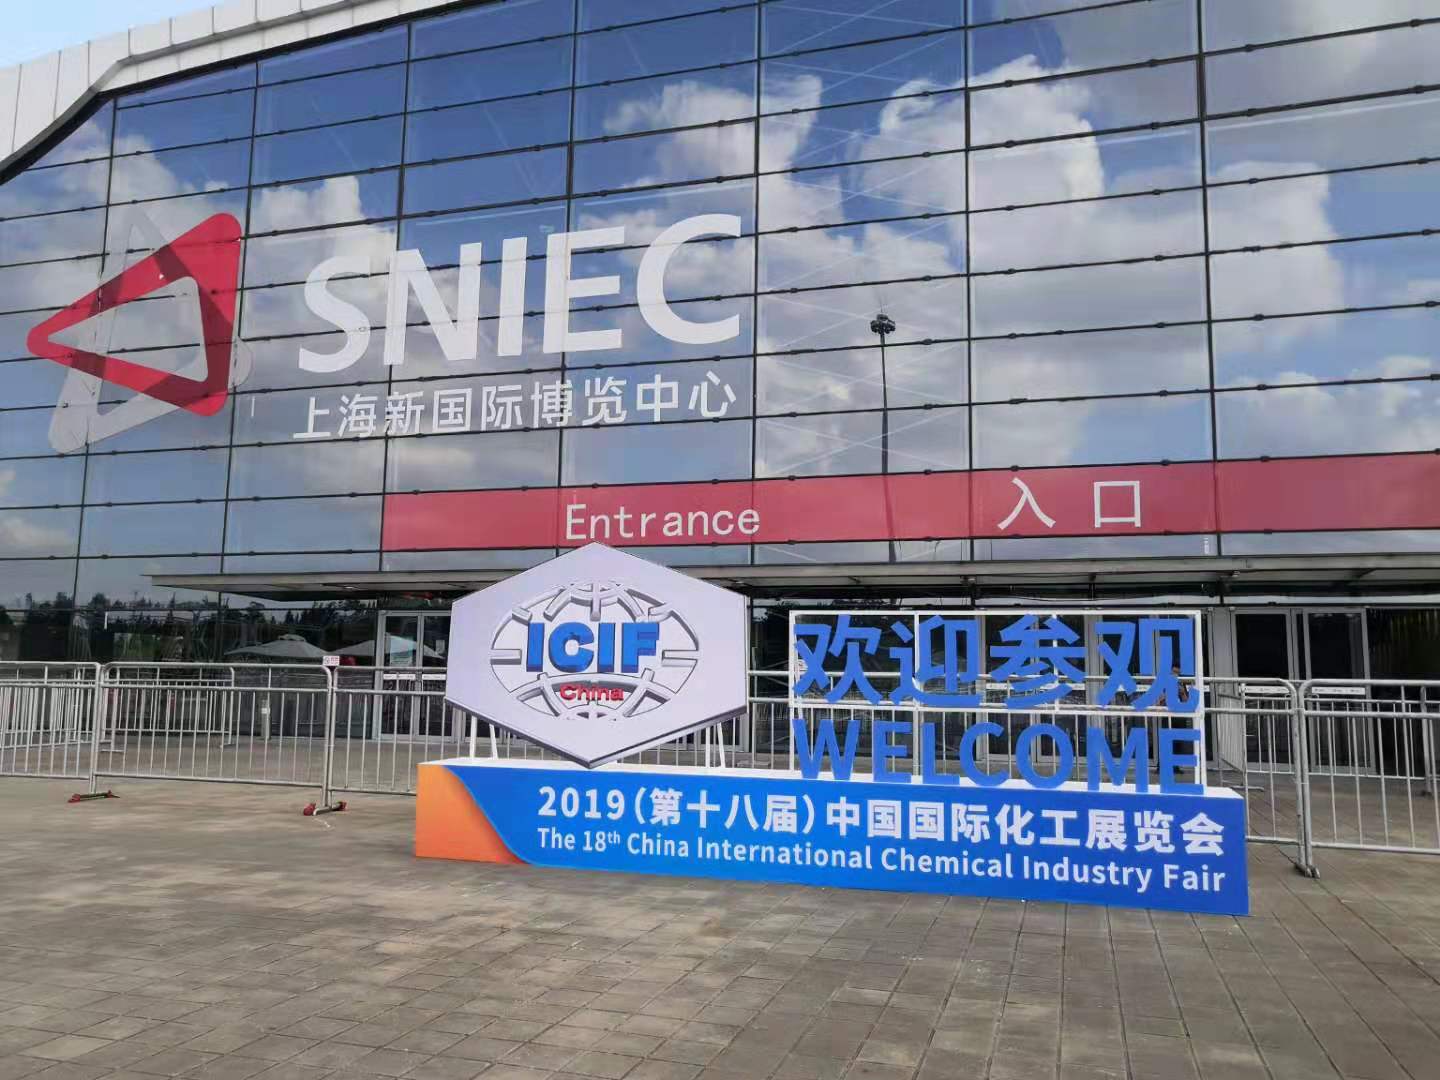 The 18th ICIF China in 2019 was held in Shanghai